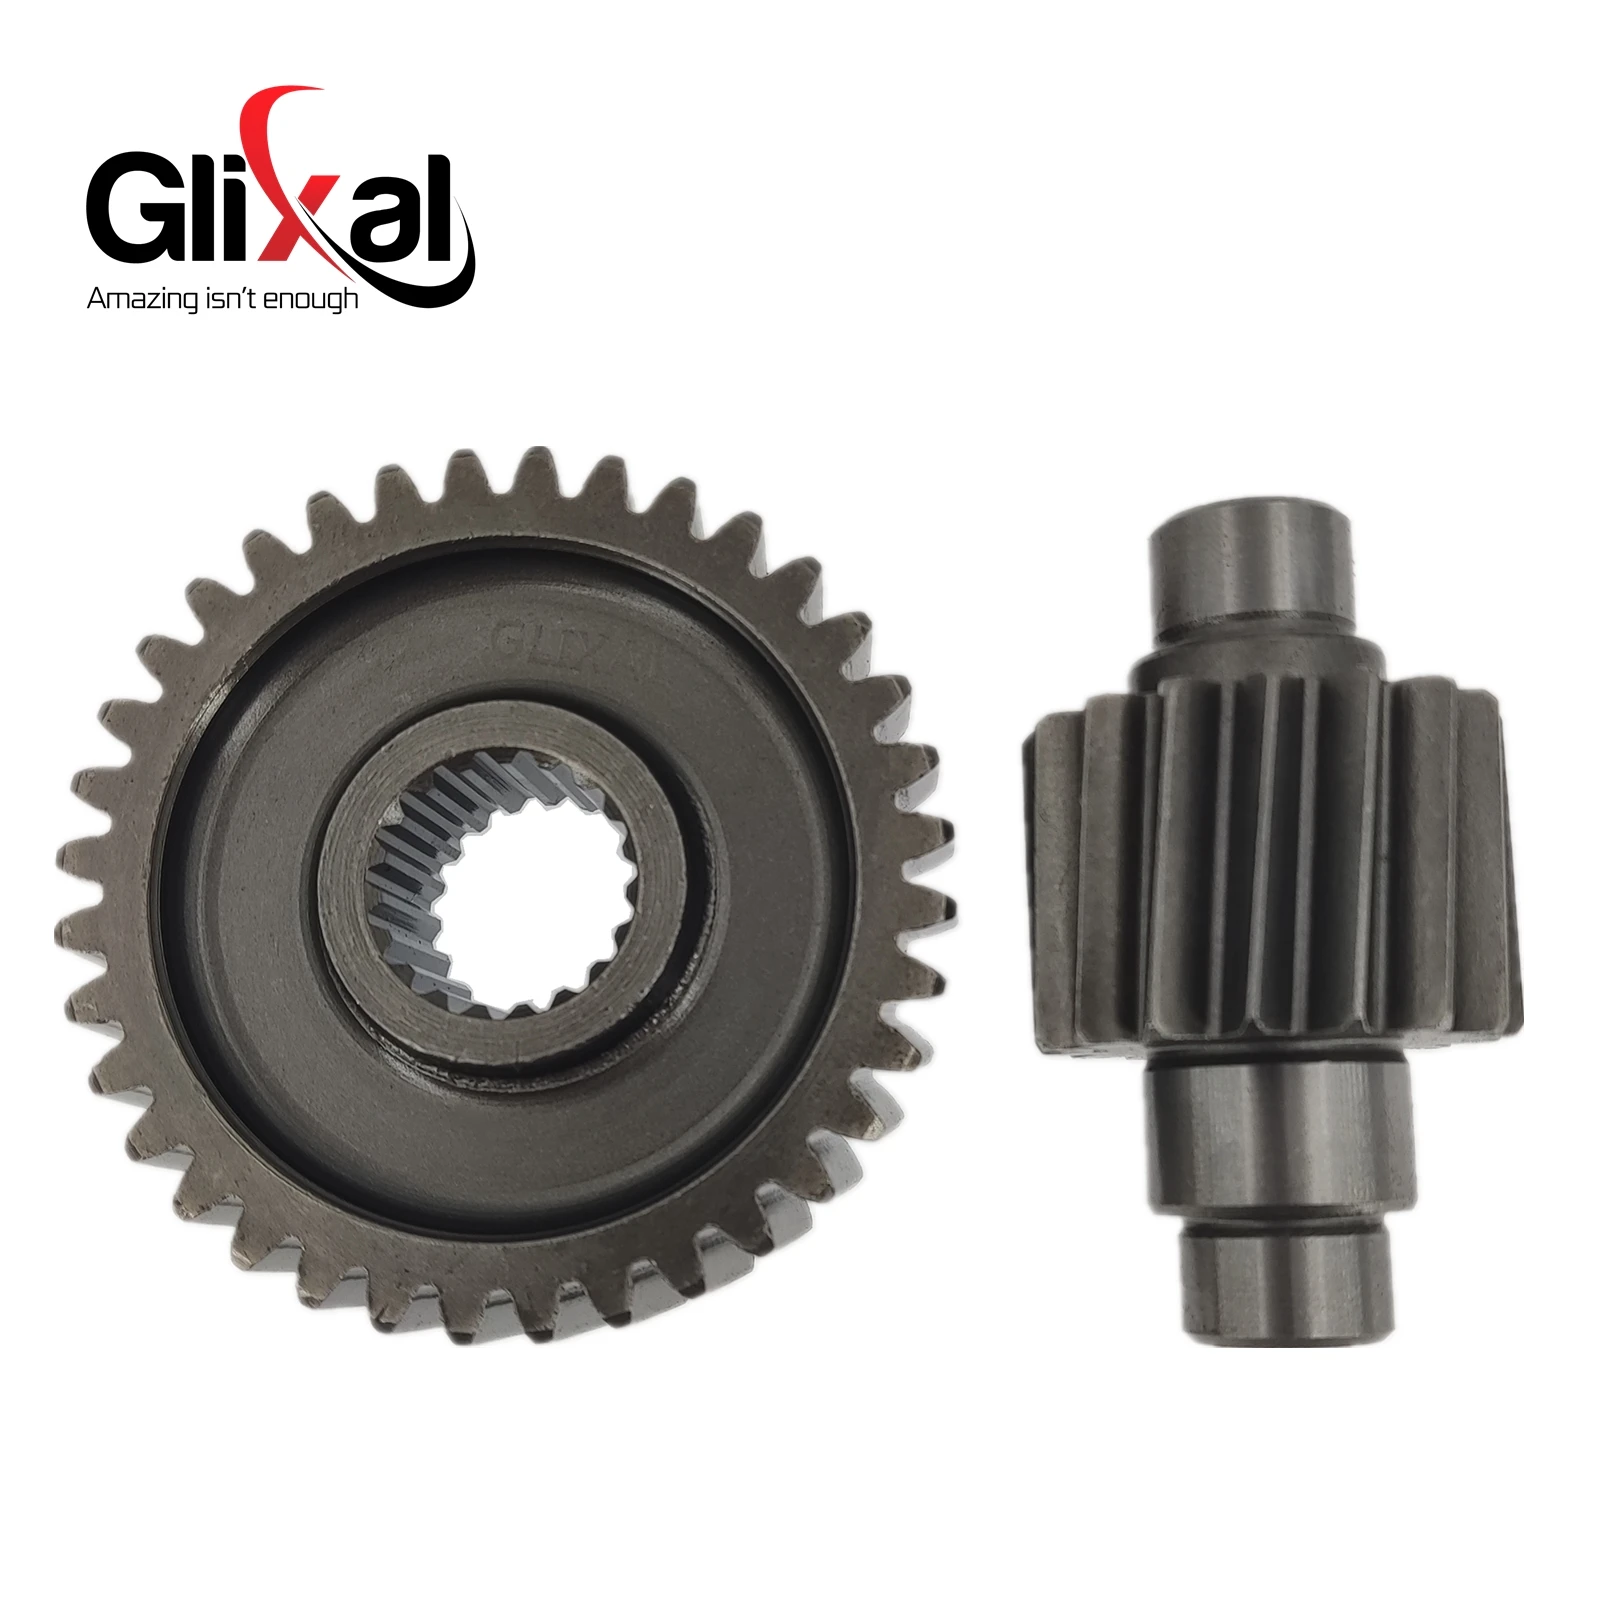  Glixal High Performance Racing Clutch Assy with Clutch Bell for  GY6 125cc 150cc 157QMJ 152QMI Engine Chinese Scooter Moped ATV Go-Kart :  Automotive